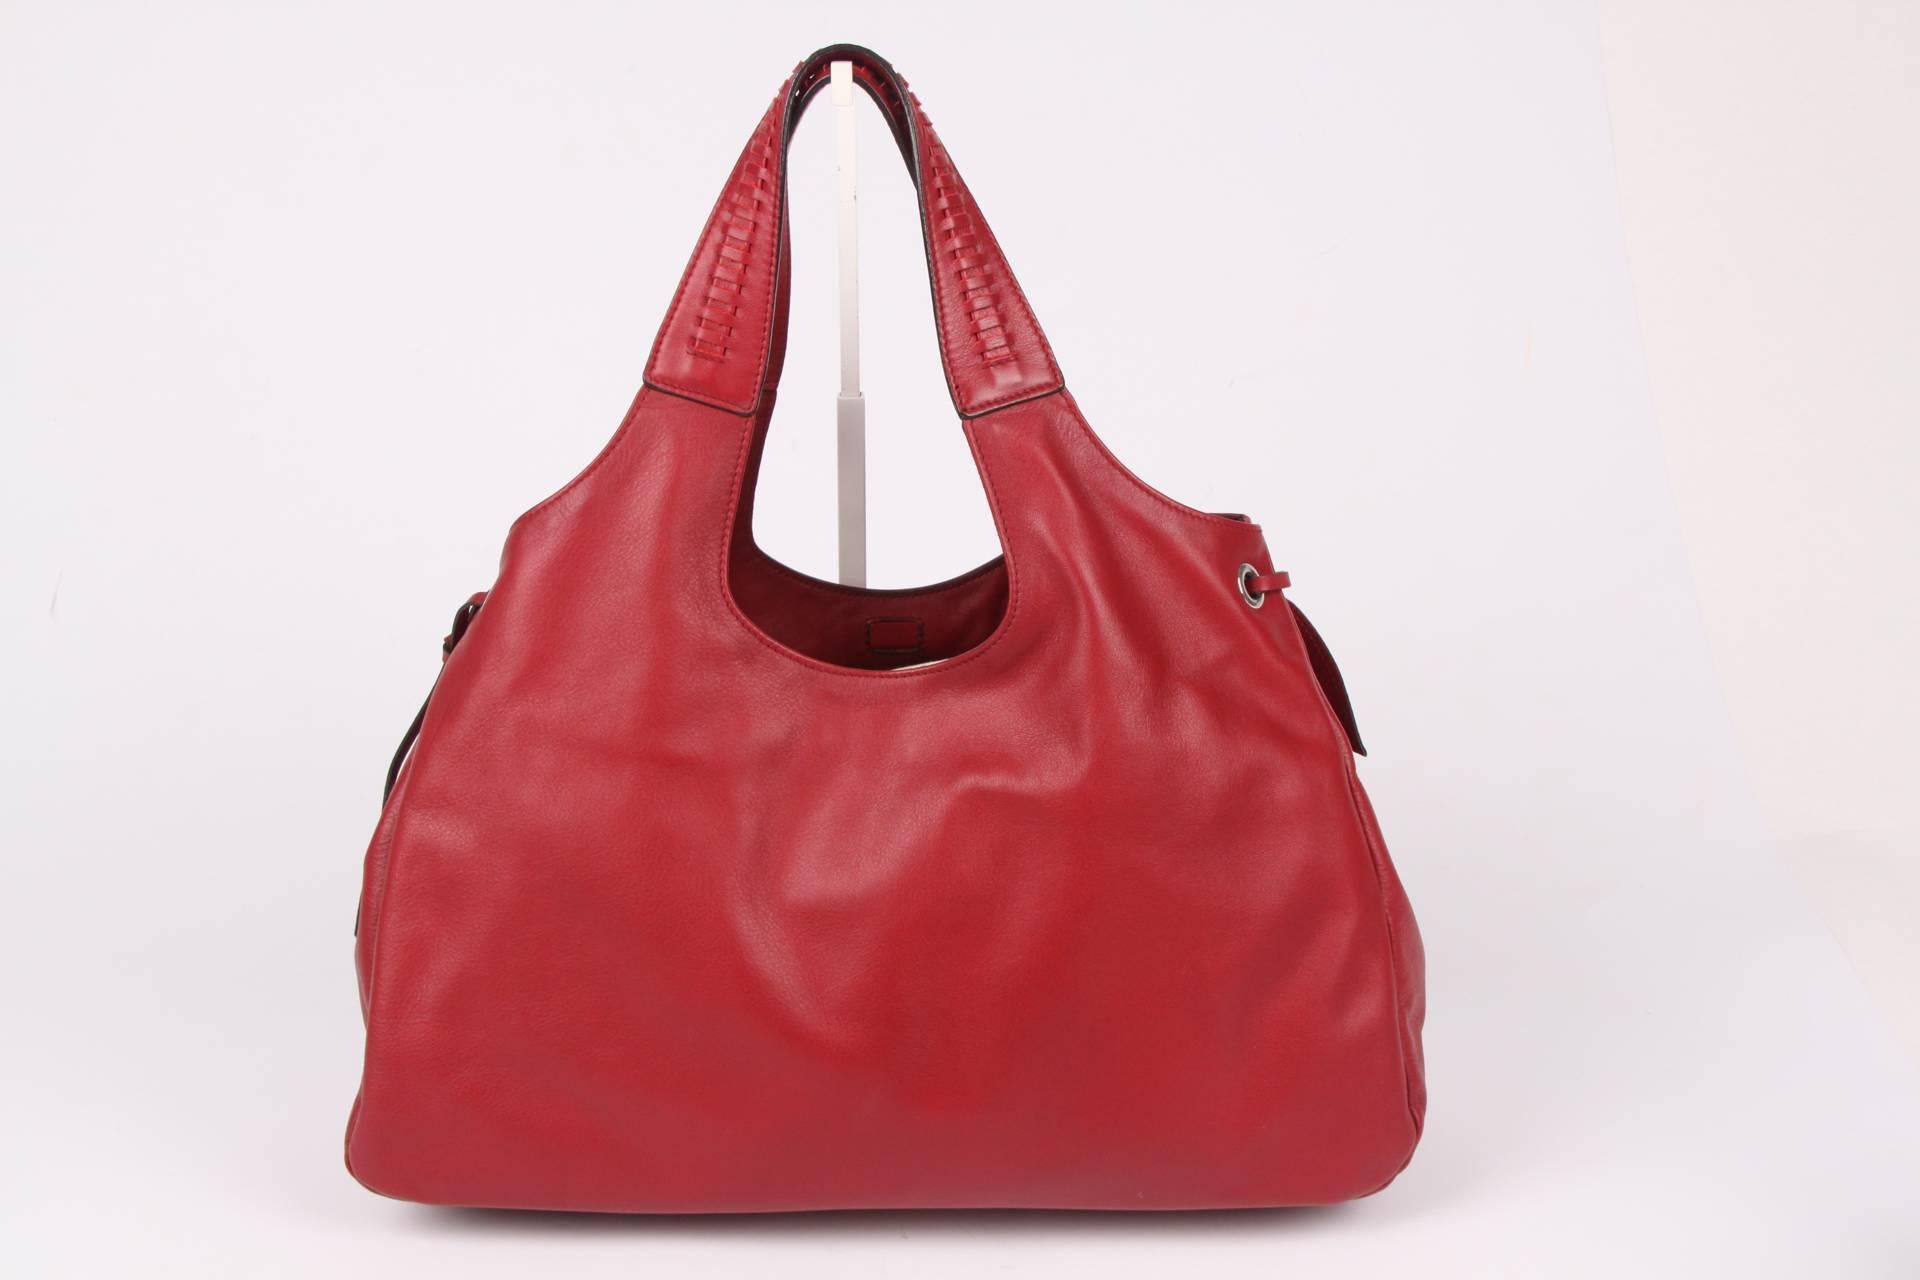 Oh la la, such a beauty! And brand new... A large calfskin leather shoulder bag by Salvatore Ferragamo in a warm shade of red.

The leather of this bag is very supple, braided handles on top and straps on both sides. Very minimalistic silver-tone